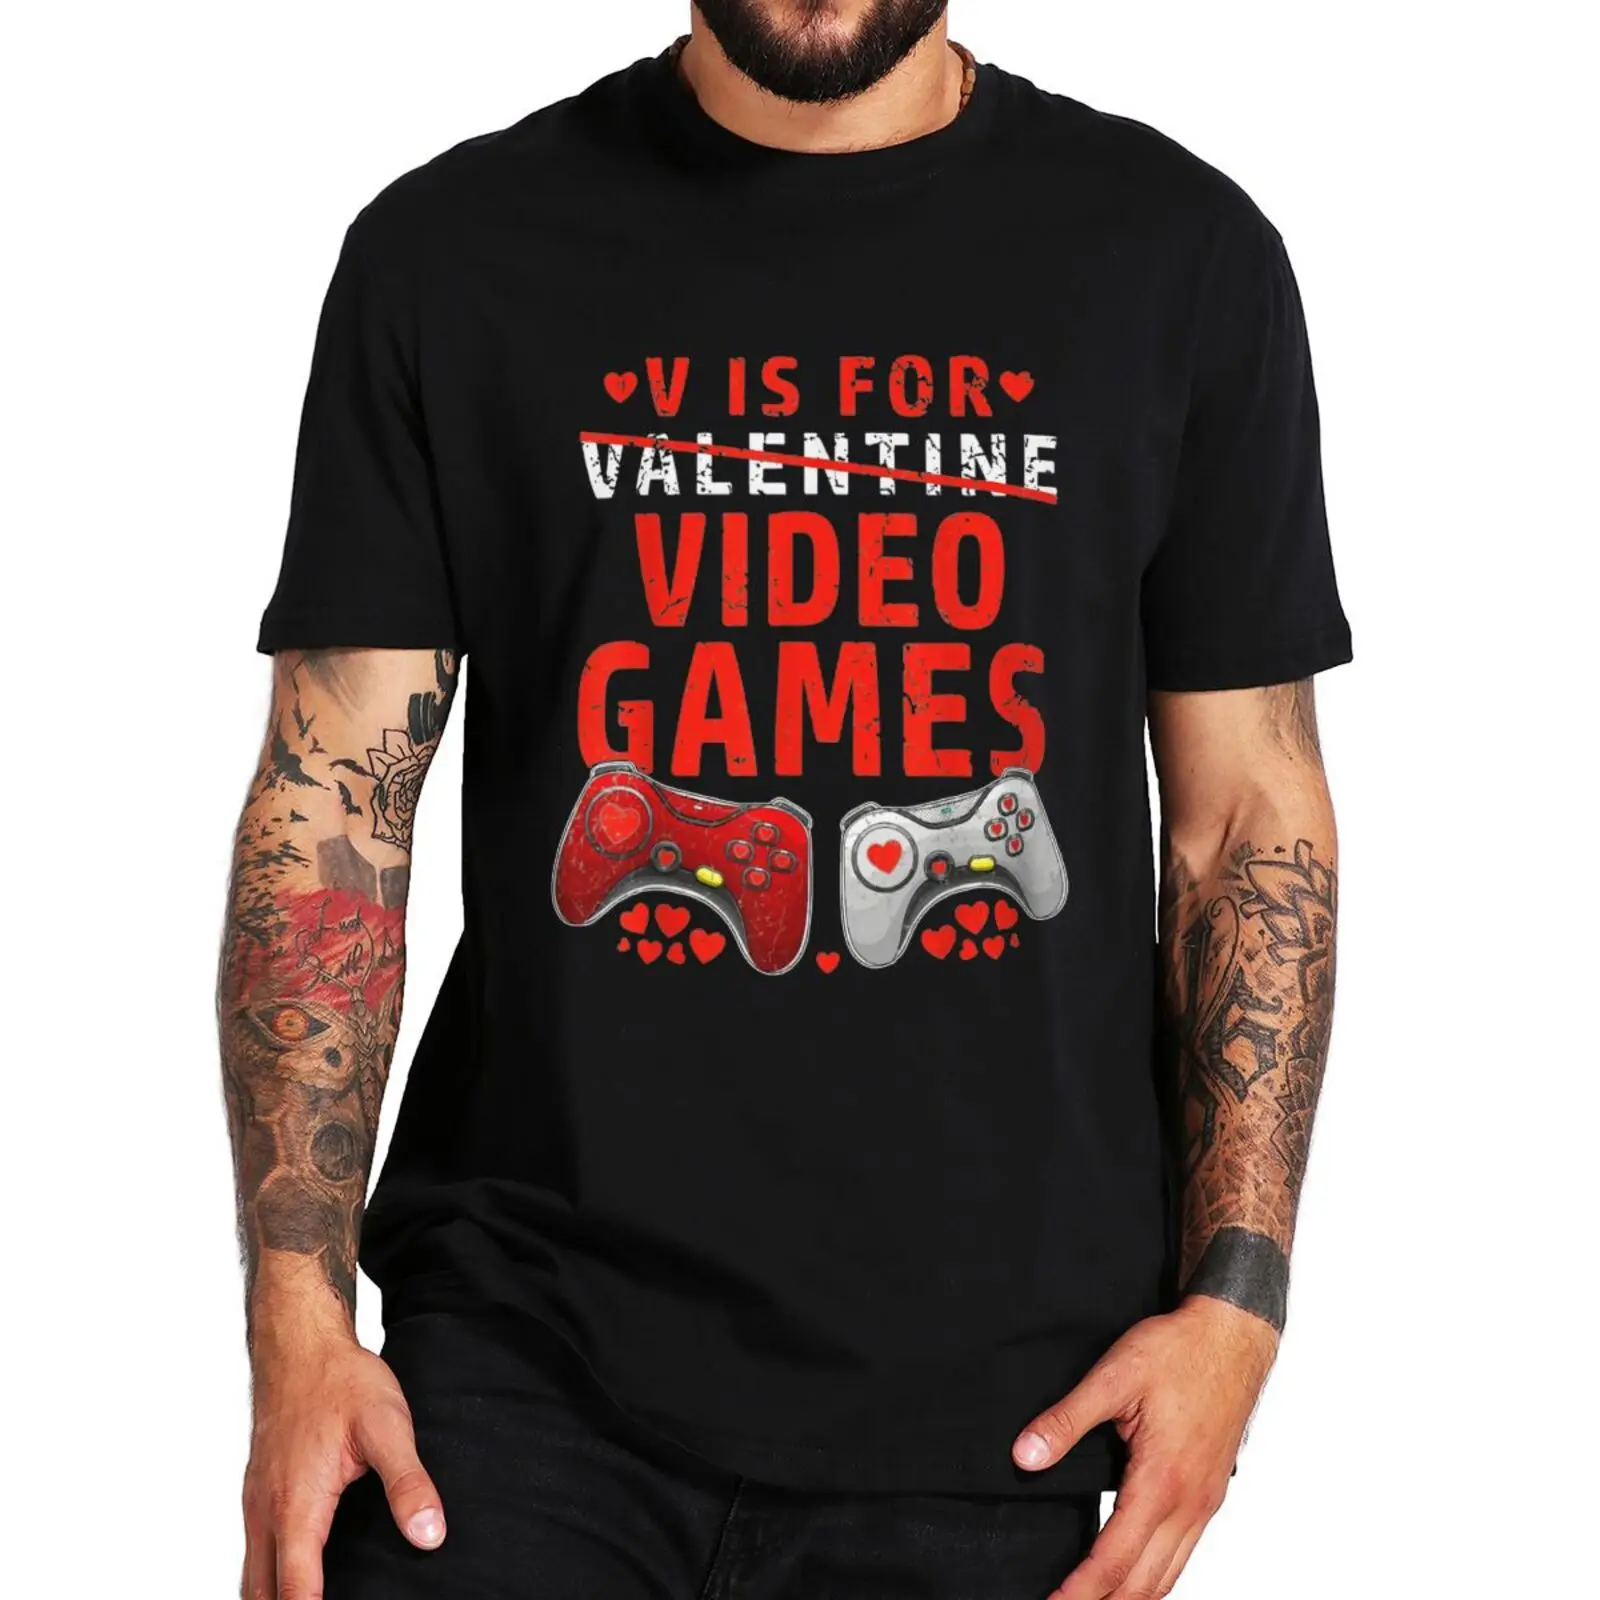 

Funny Video Games T Shirt Humor Valentines Jokes Game Lovers Tee Tops 100% Cotton Unisex Soft Casual T-shirt EU Size